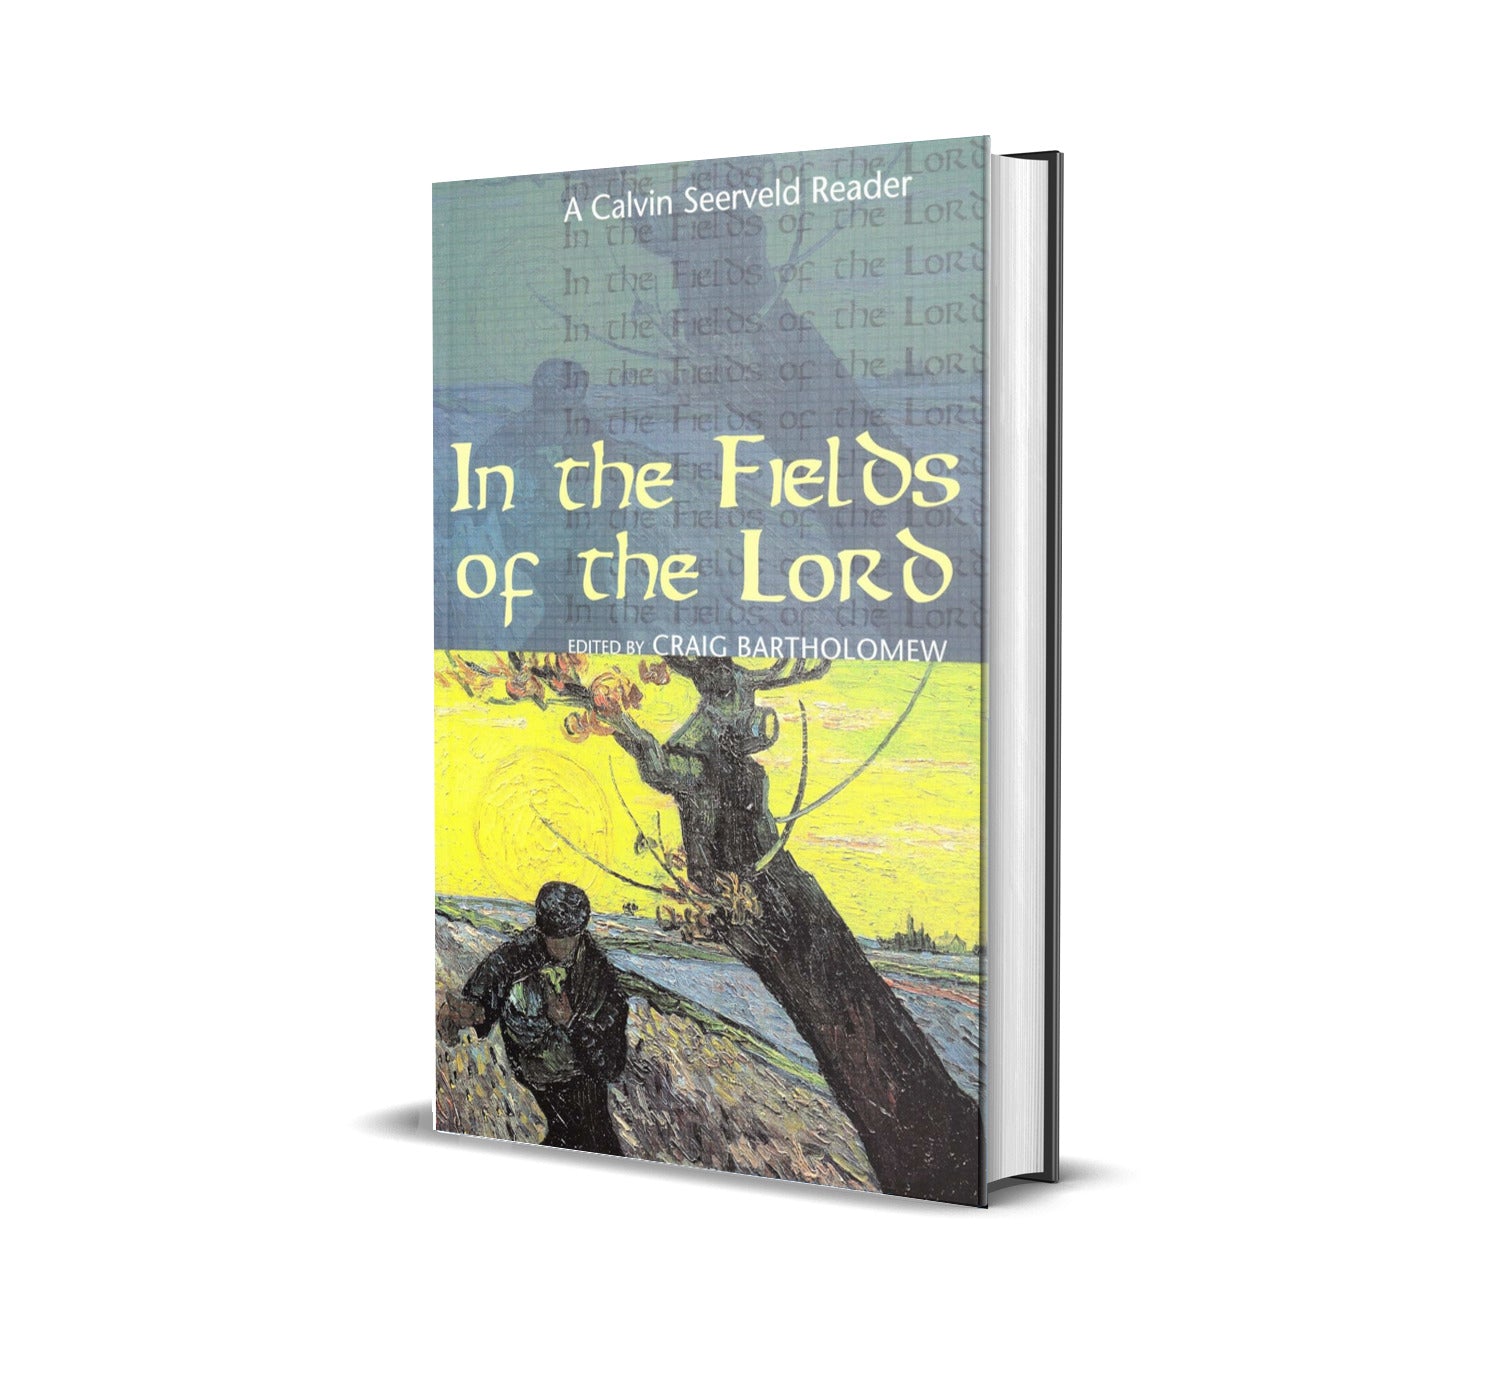 In the Fields of the Lord